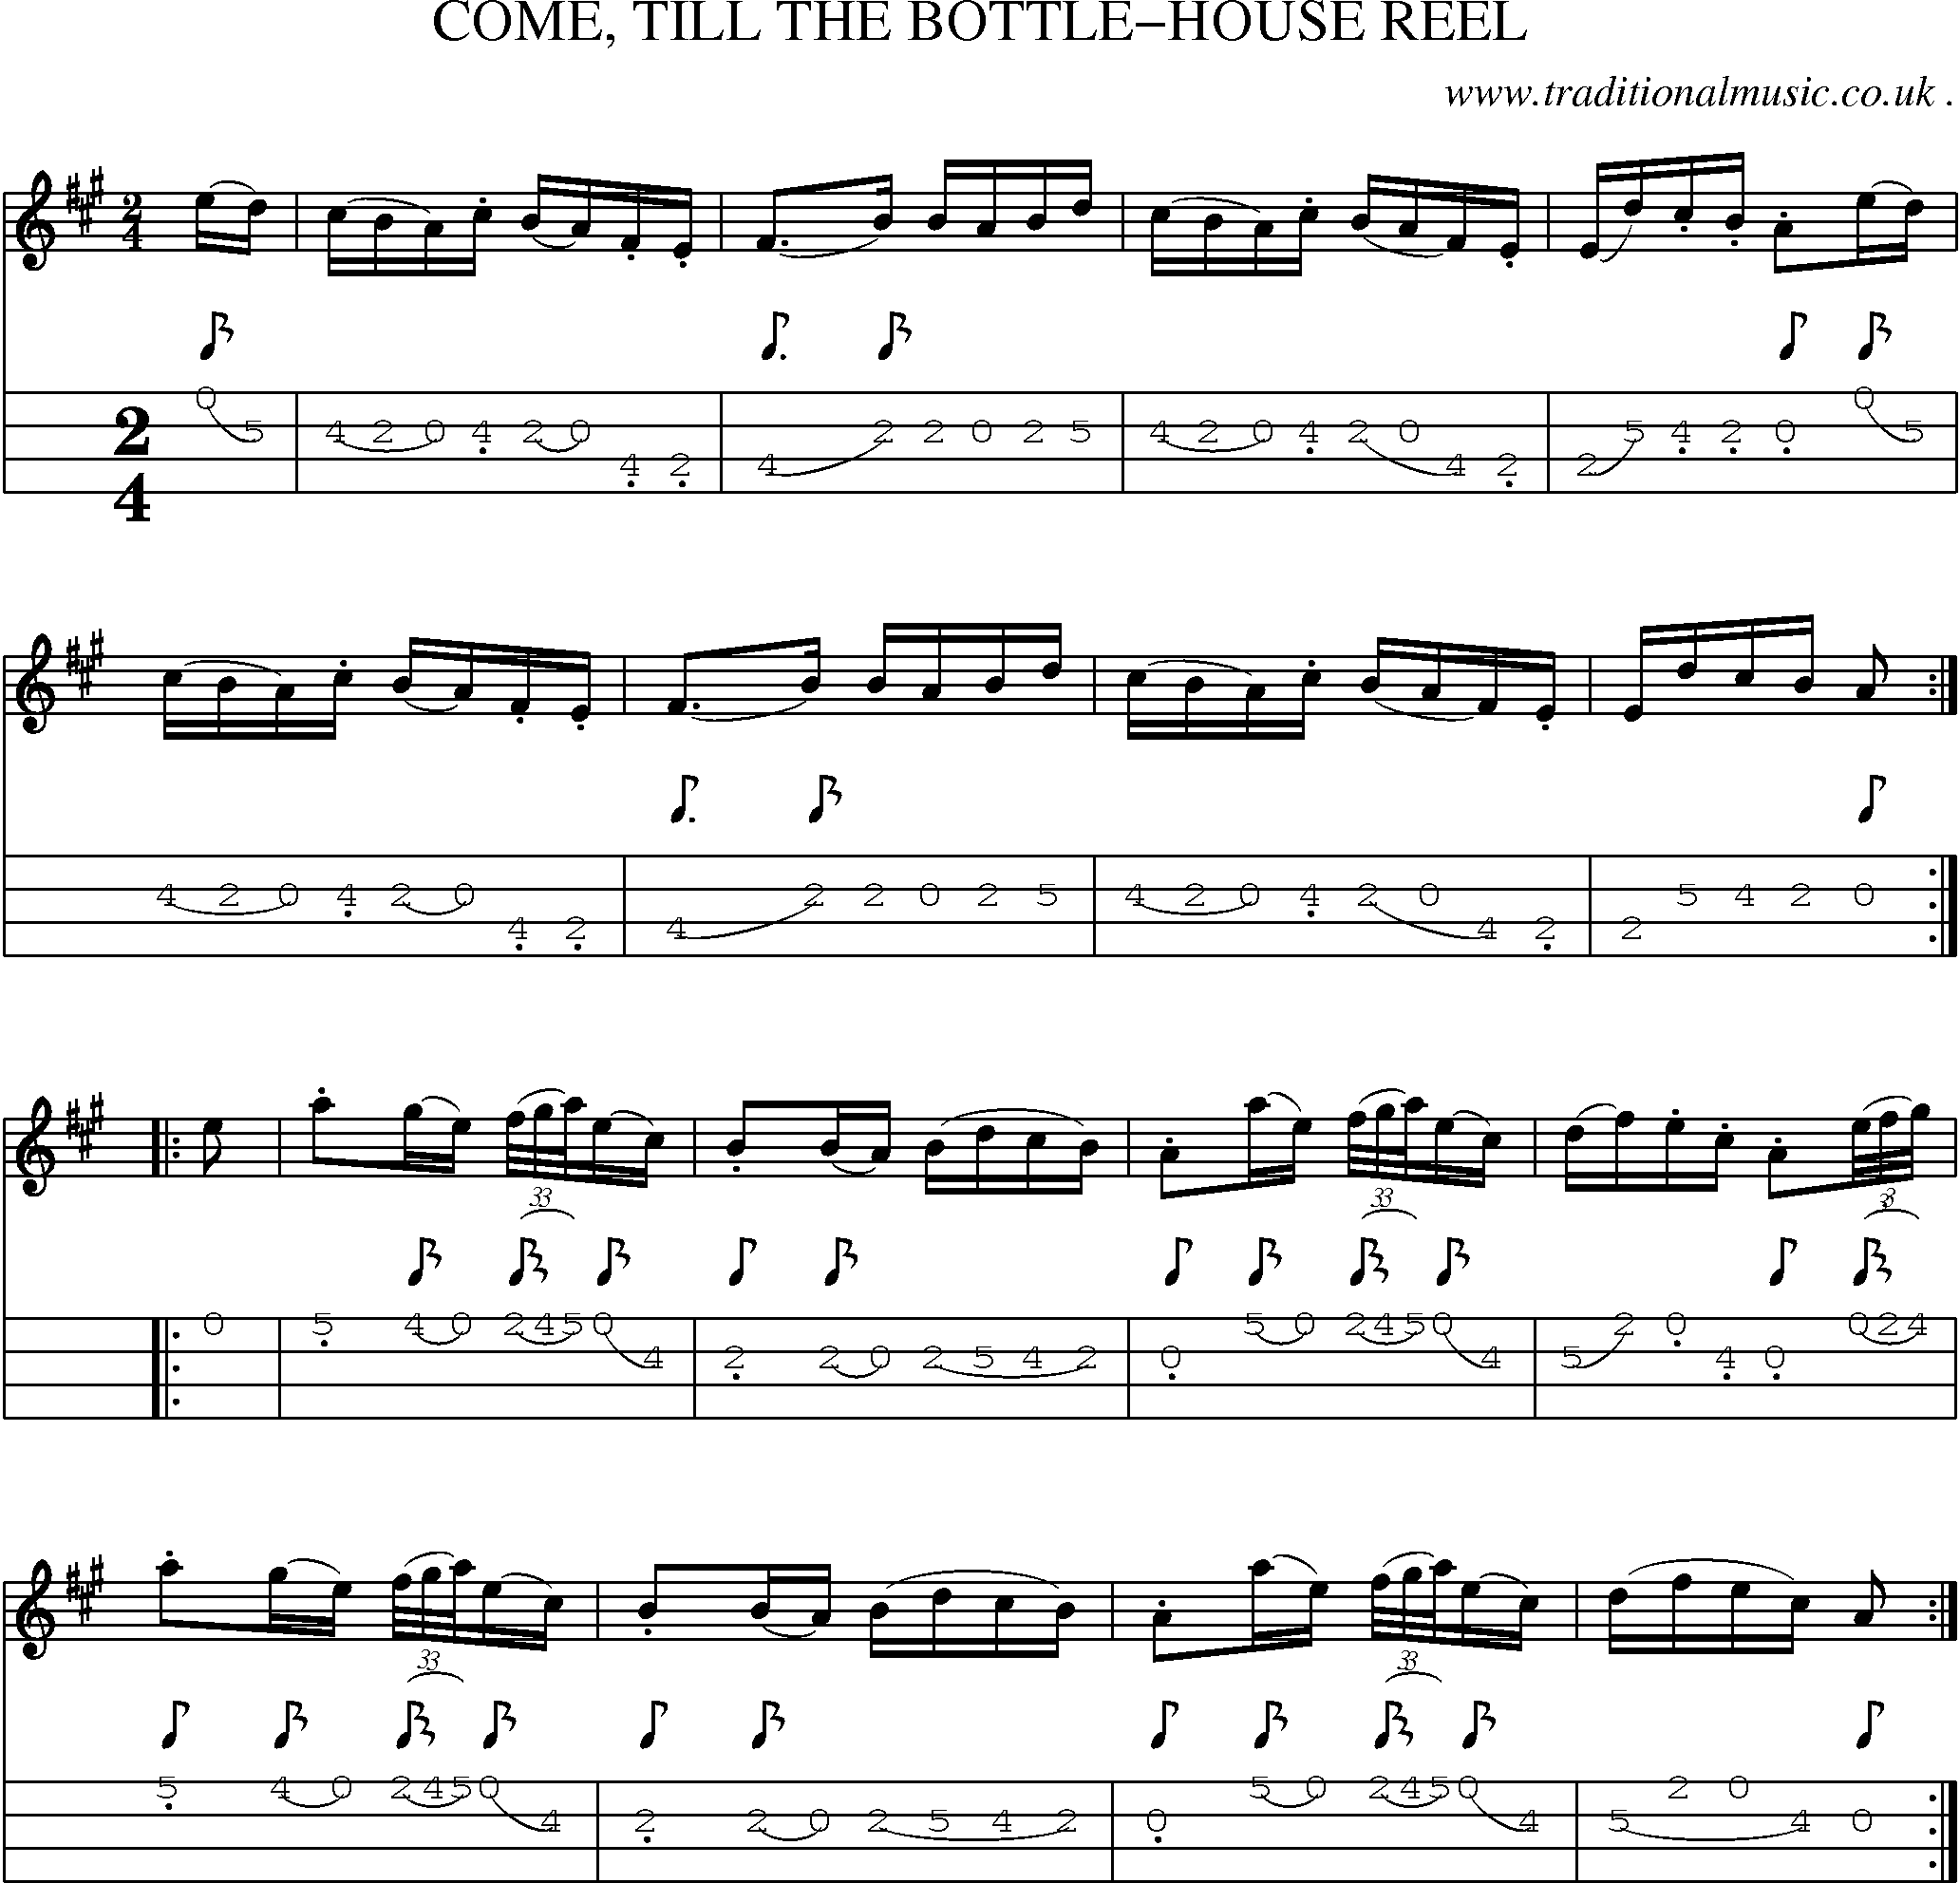 Sheet-Music and Mandolin Tabs for Come Till The Bottle-house Reel